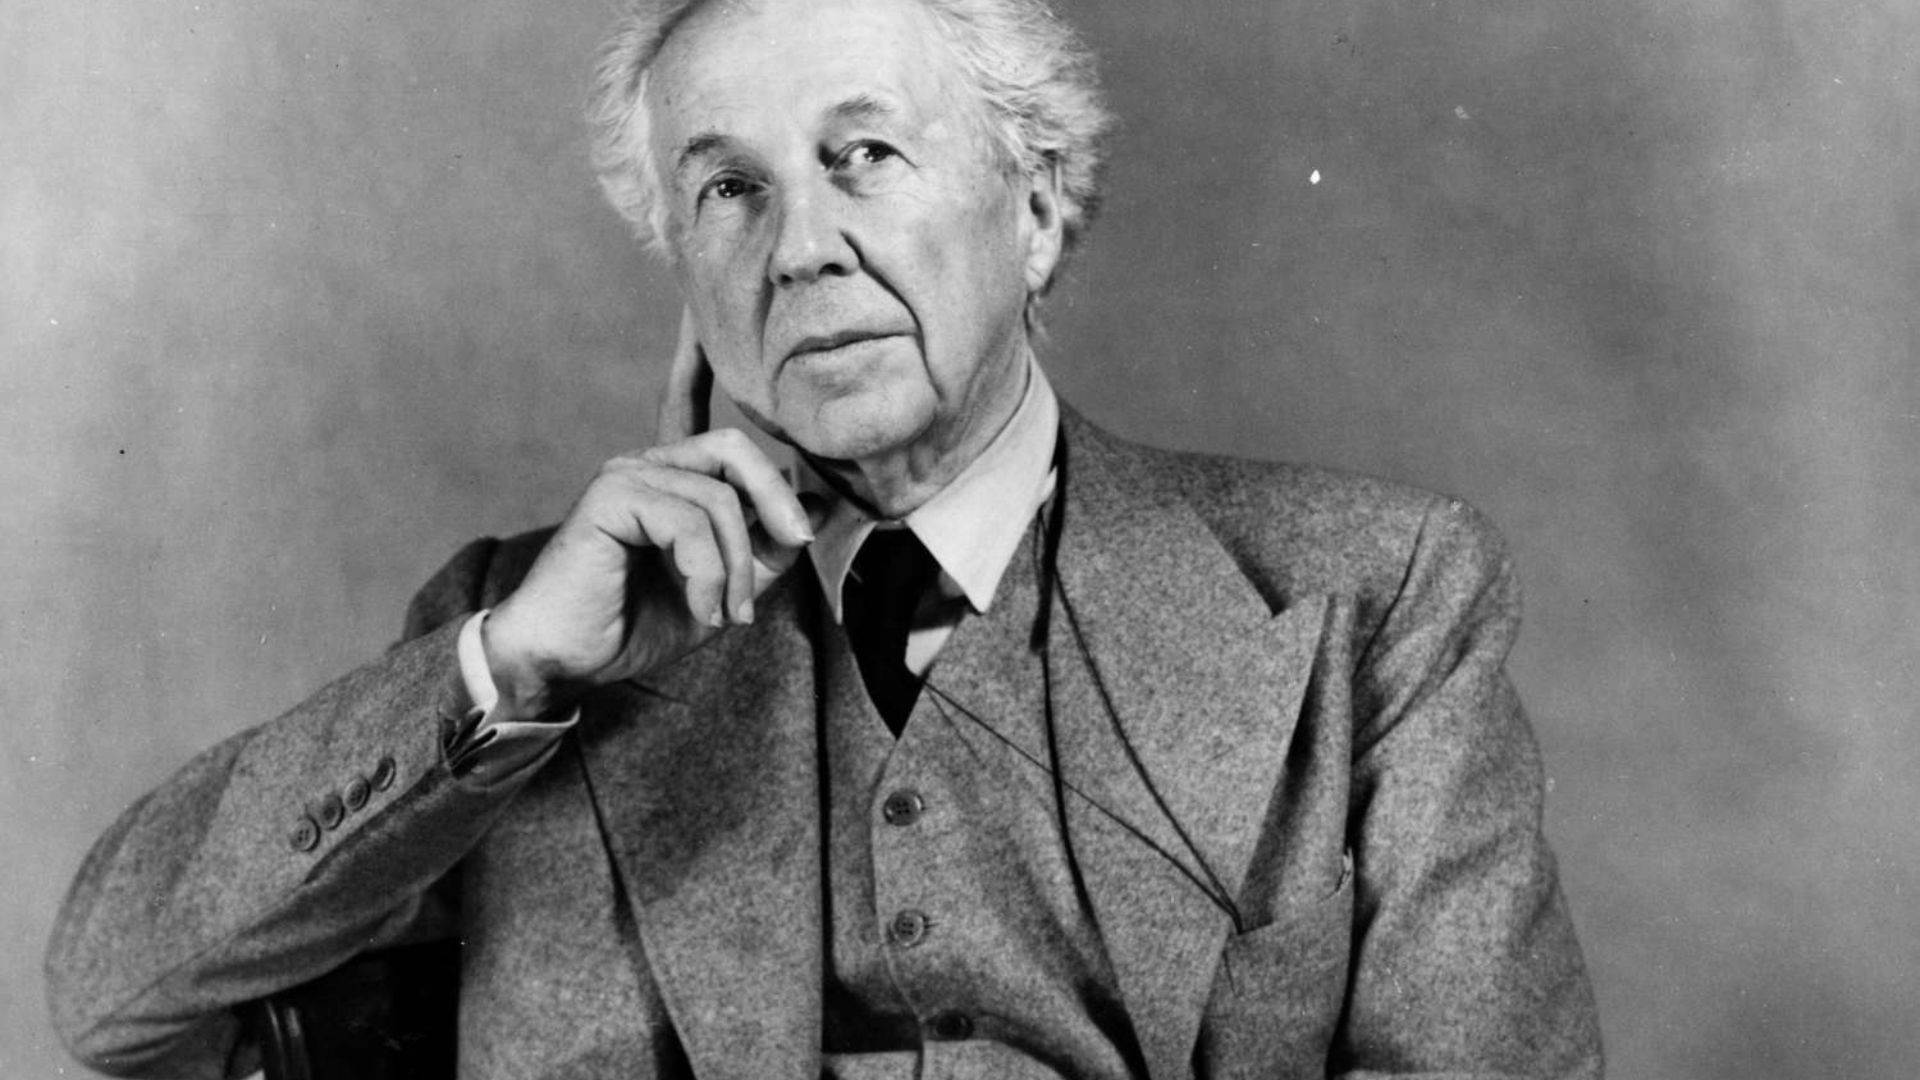 Frank Lloyd Wright Sitting And Wearing A Suit